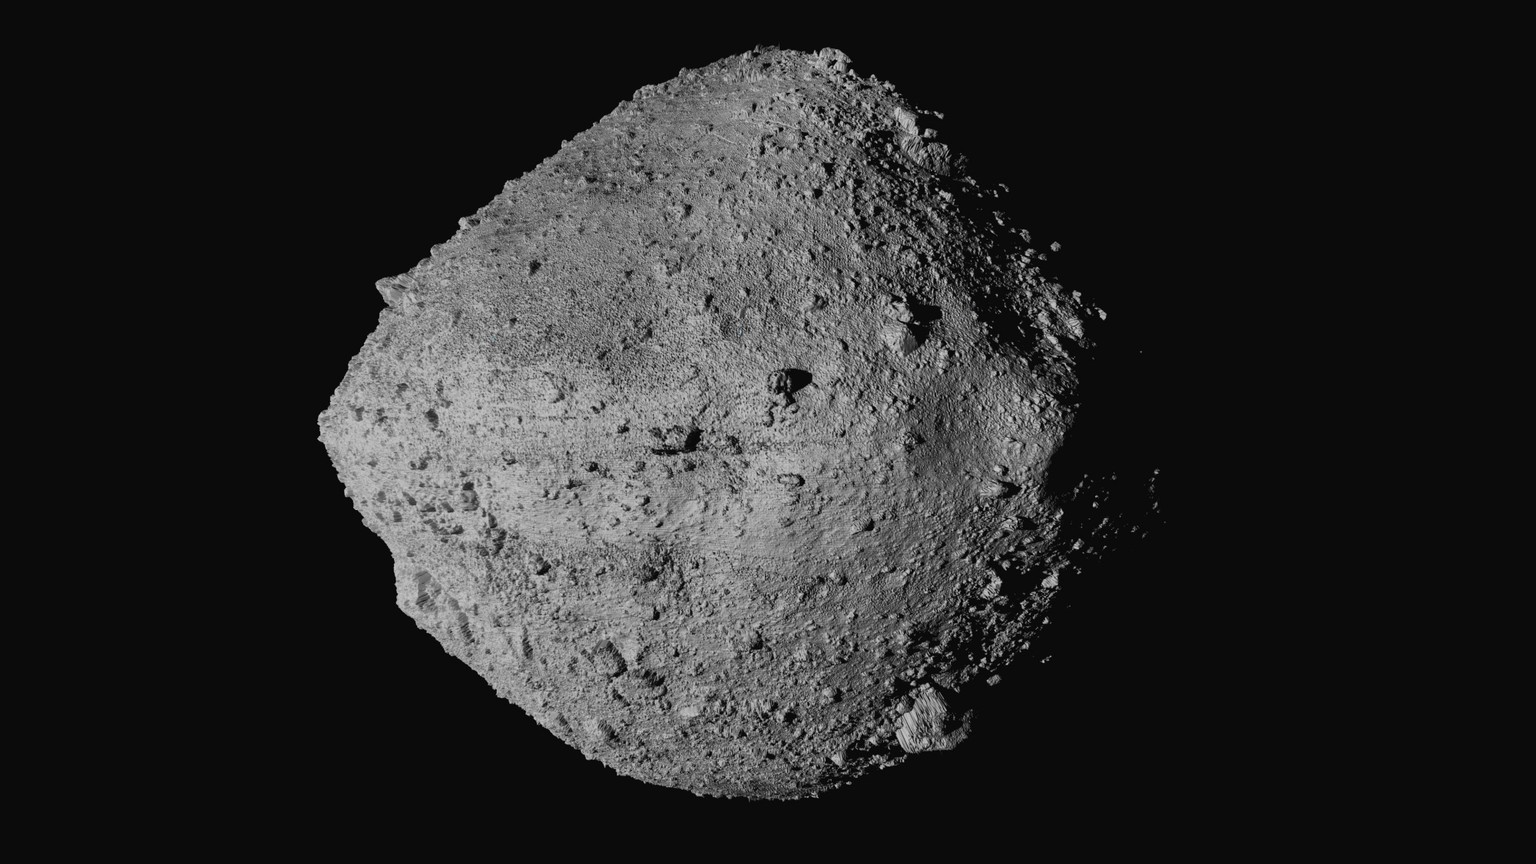 FILE - This undated image made available by NASA shows the asteroid Bennu from the OSIRIS-REx spacecraft. On Wednesday, Aug. 11, 2021, scientists said they have a better handle on asteroid Bennu